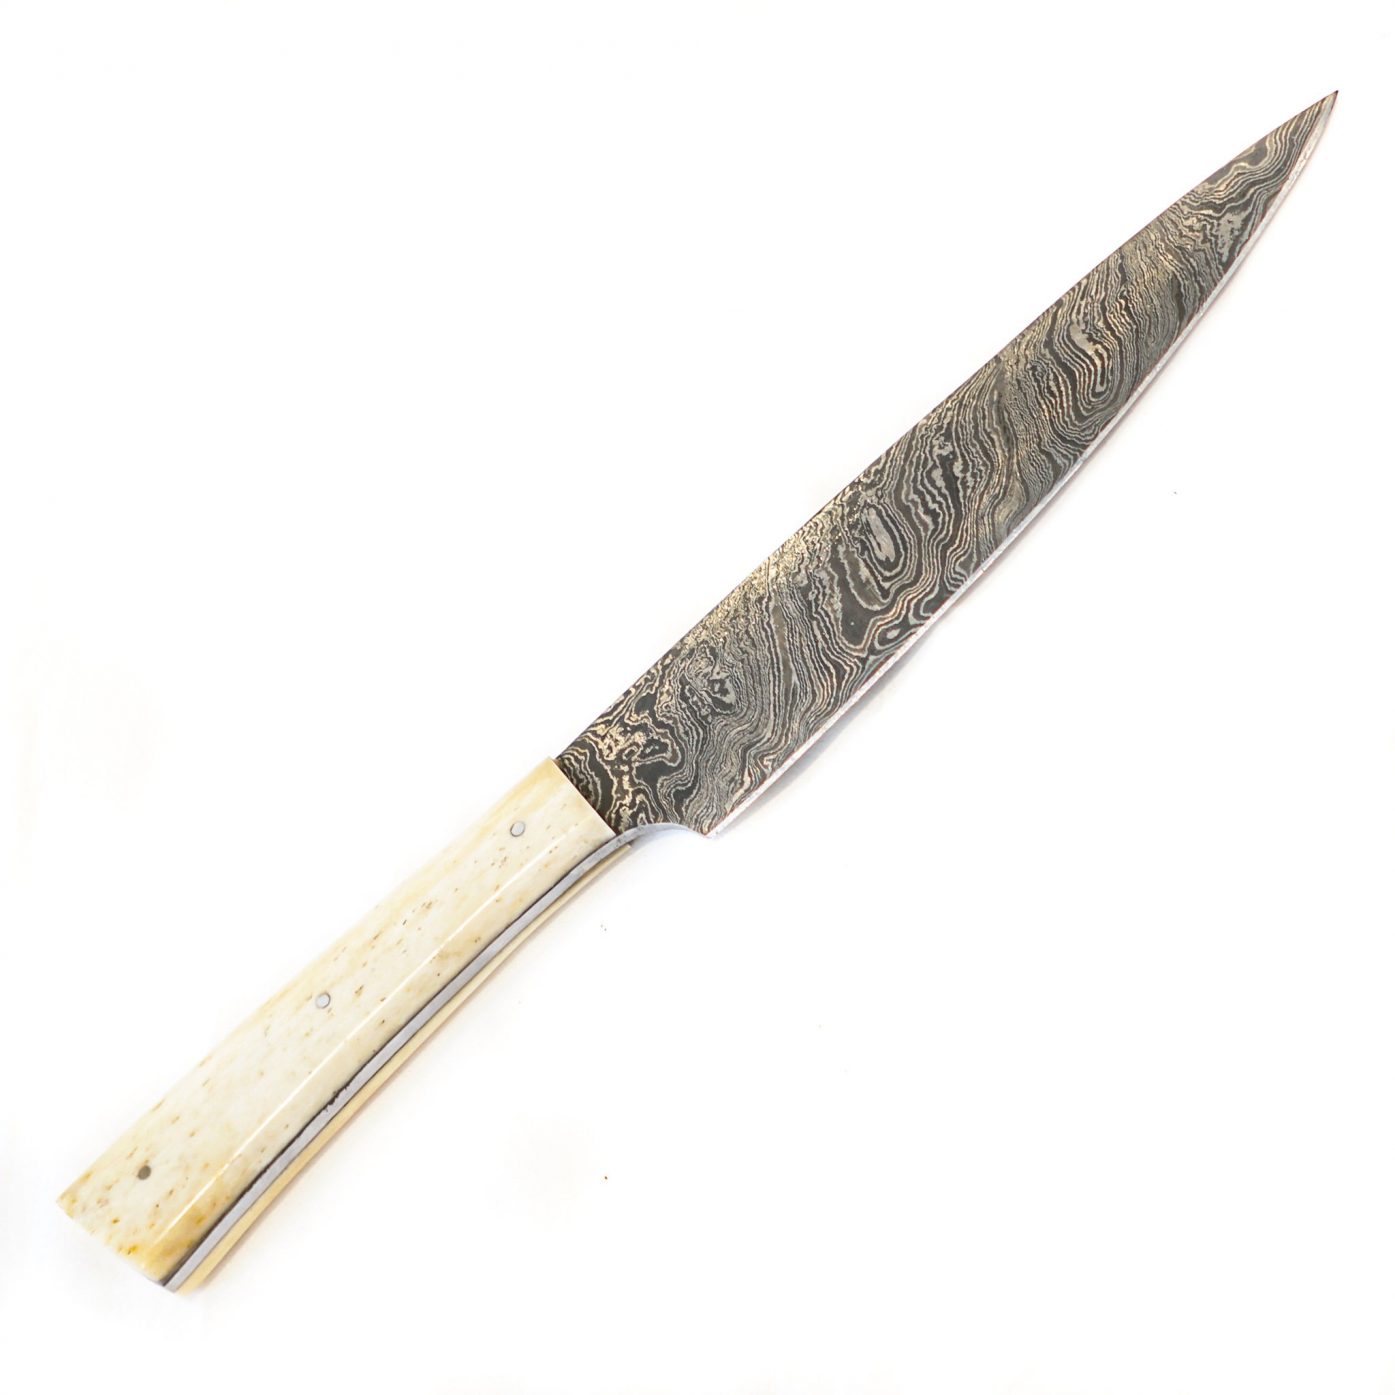 Damascus Steel Carving Knife